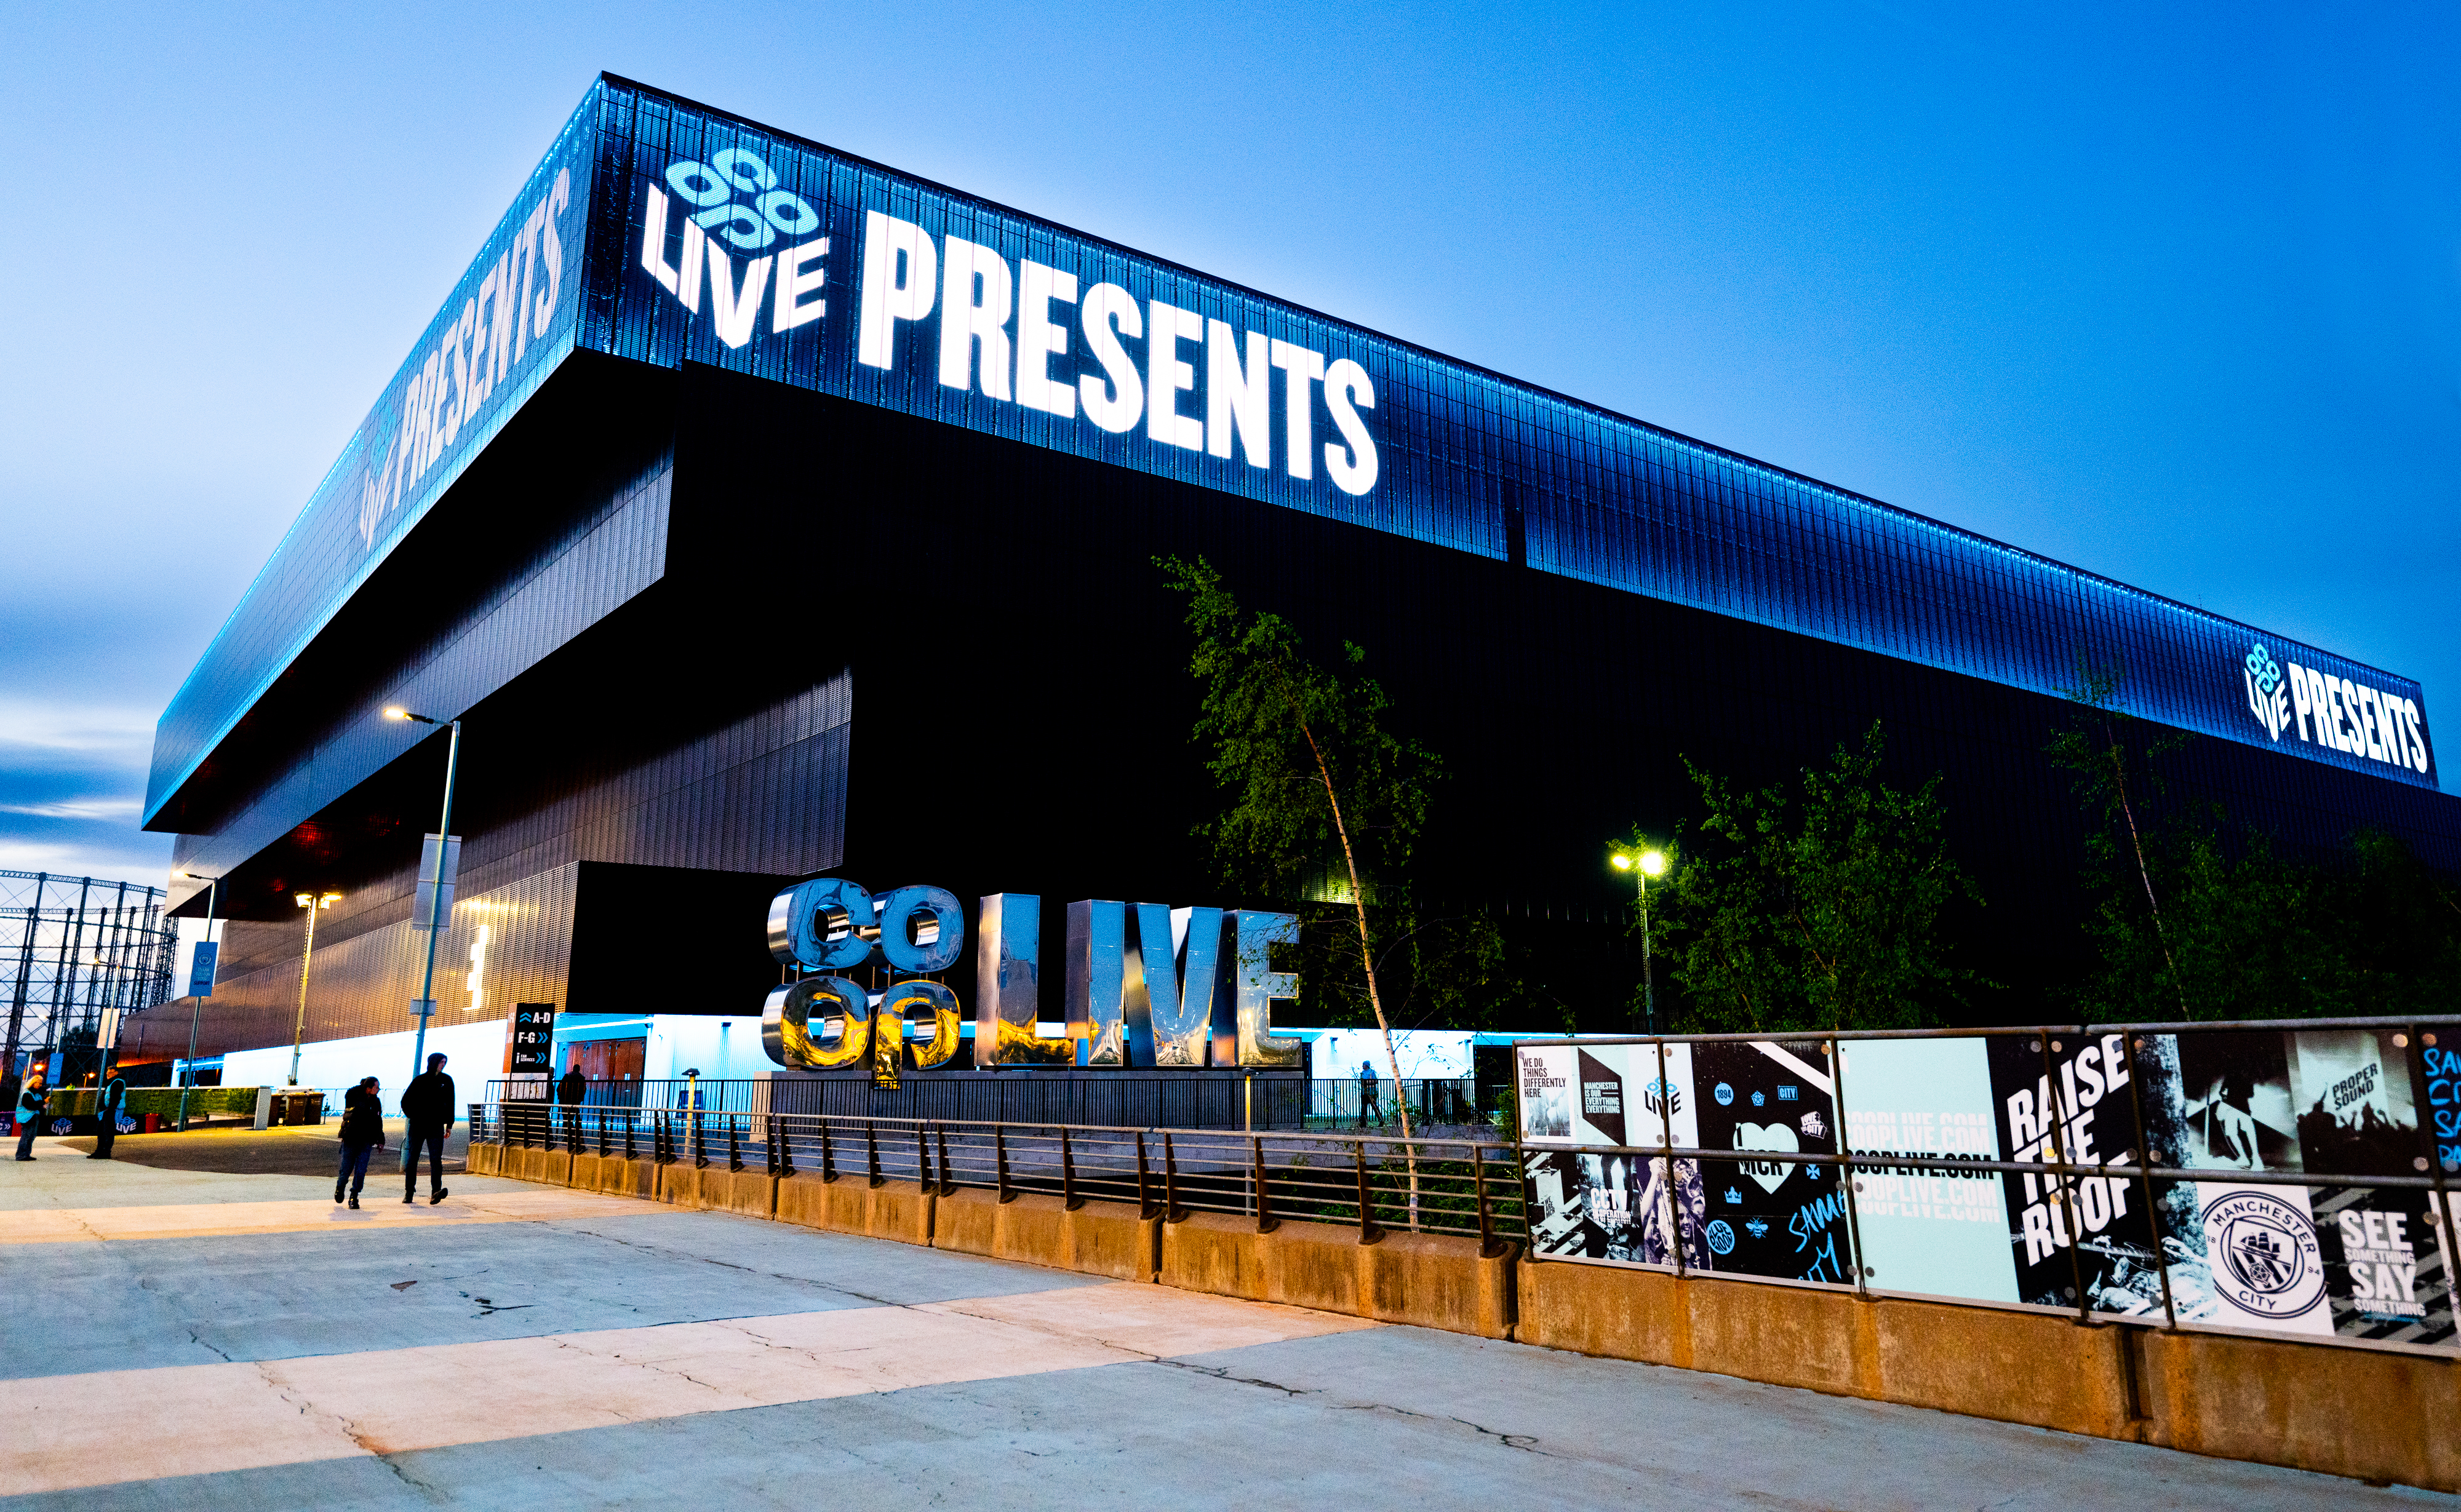 The Co-Op Live venue is the biggest in the UK with a capacity of 23,500